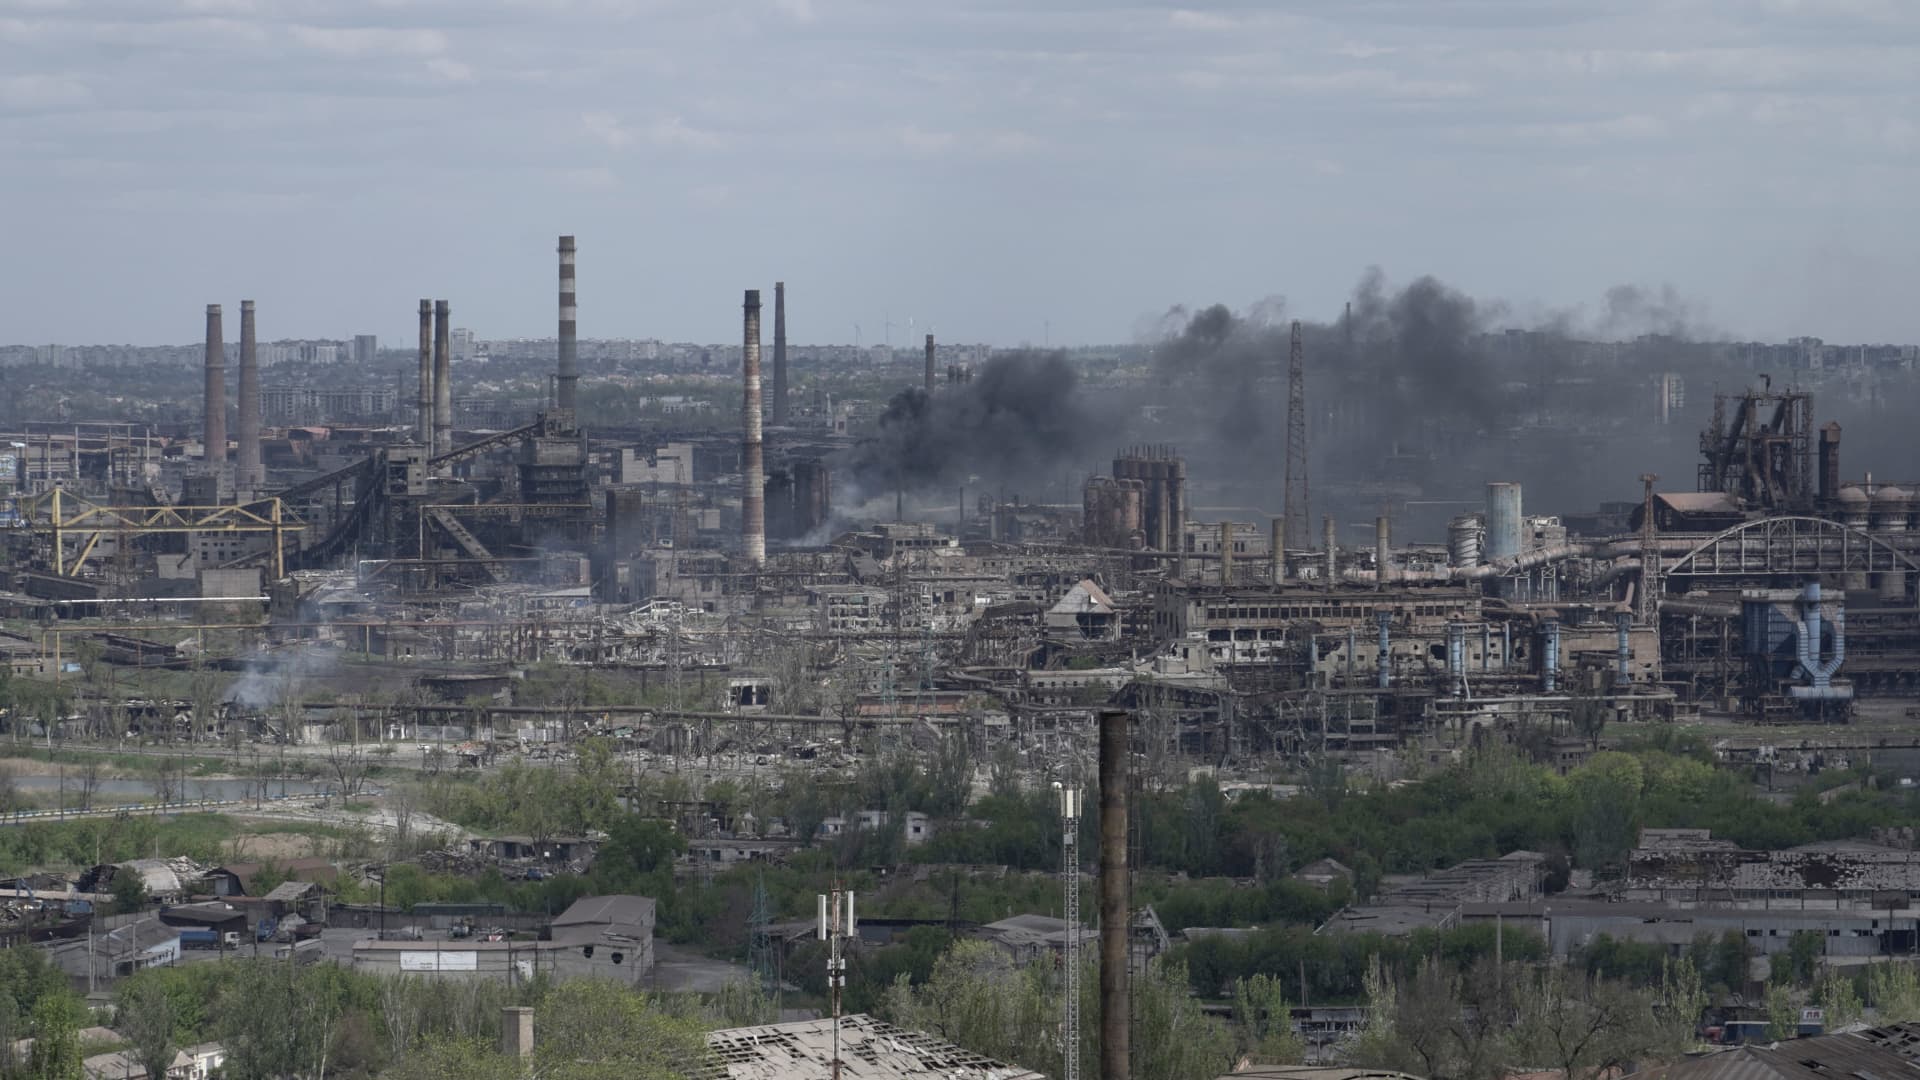 TOPSHOT - A view shows the Azovstal steel plant in the city of Mariupol on May 10, 2022, amid the ongoing Russian military action in Ukraine. 